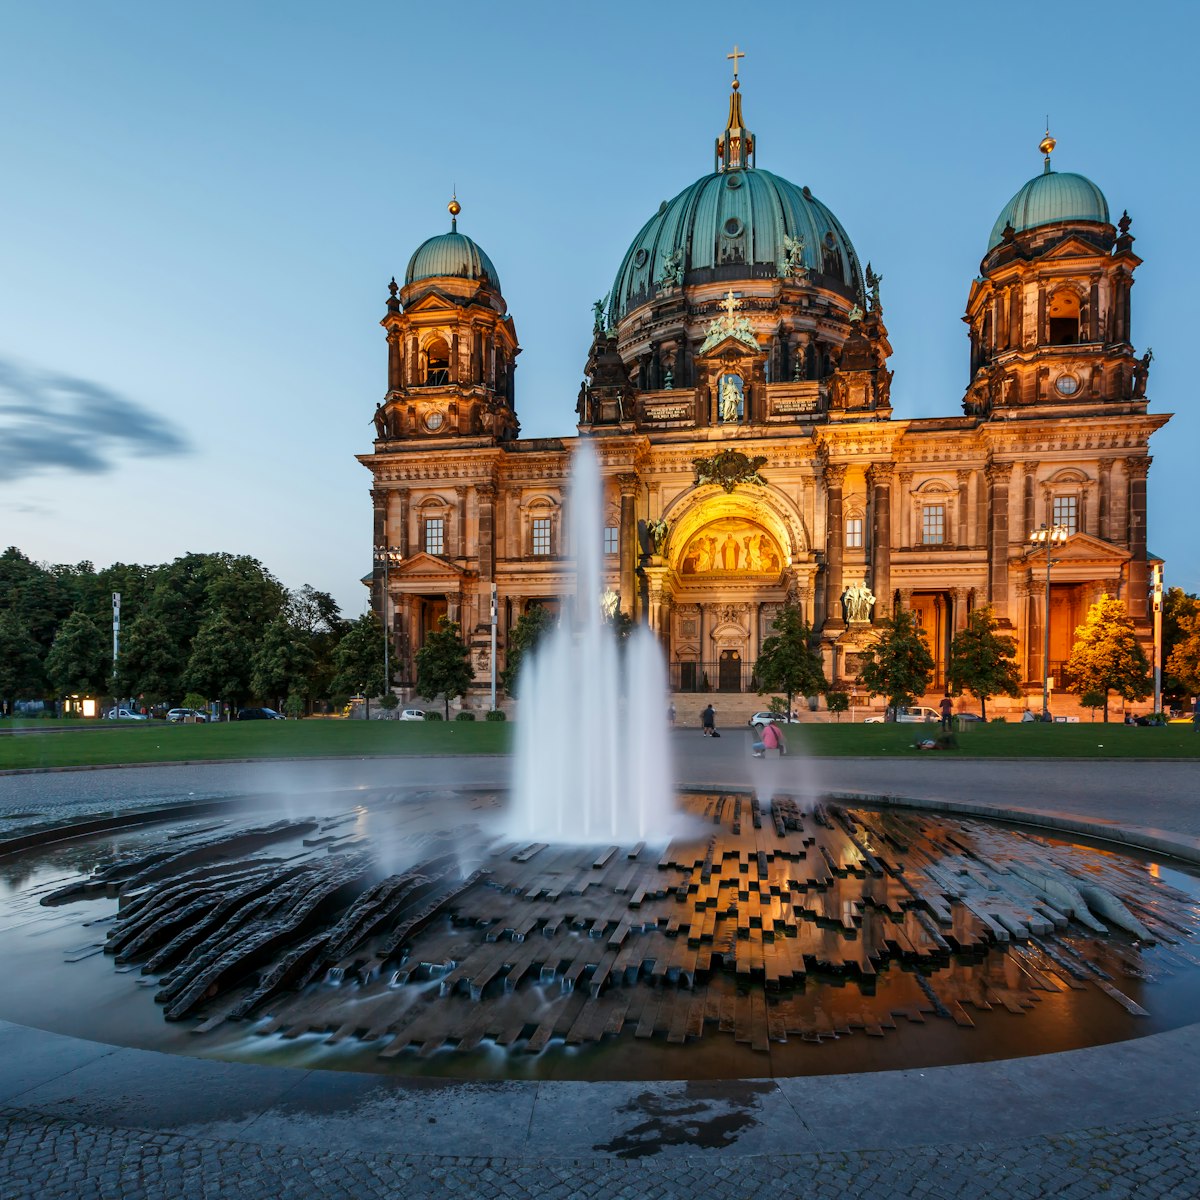 Berlin Cathedral (Berliner Dom) and Fountain Illuminated in the Evening, Germany